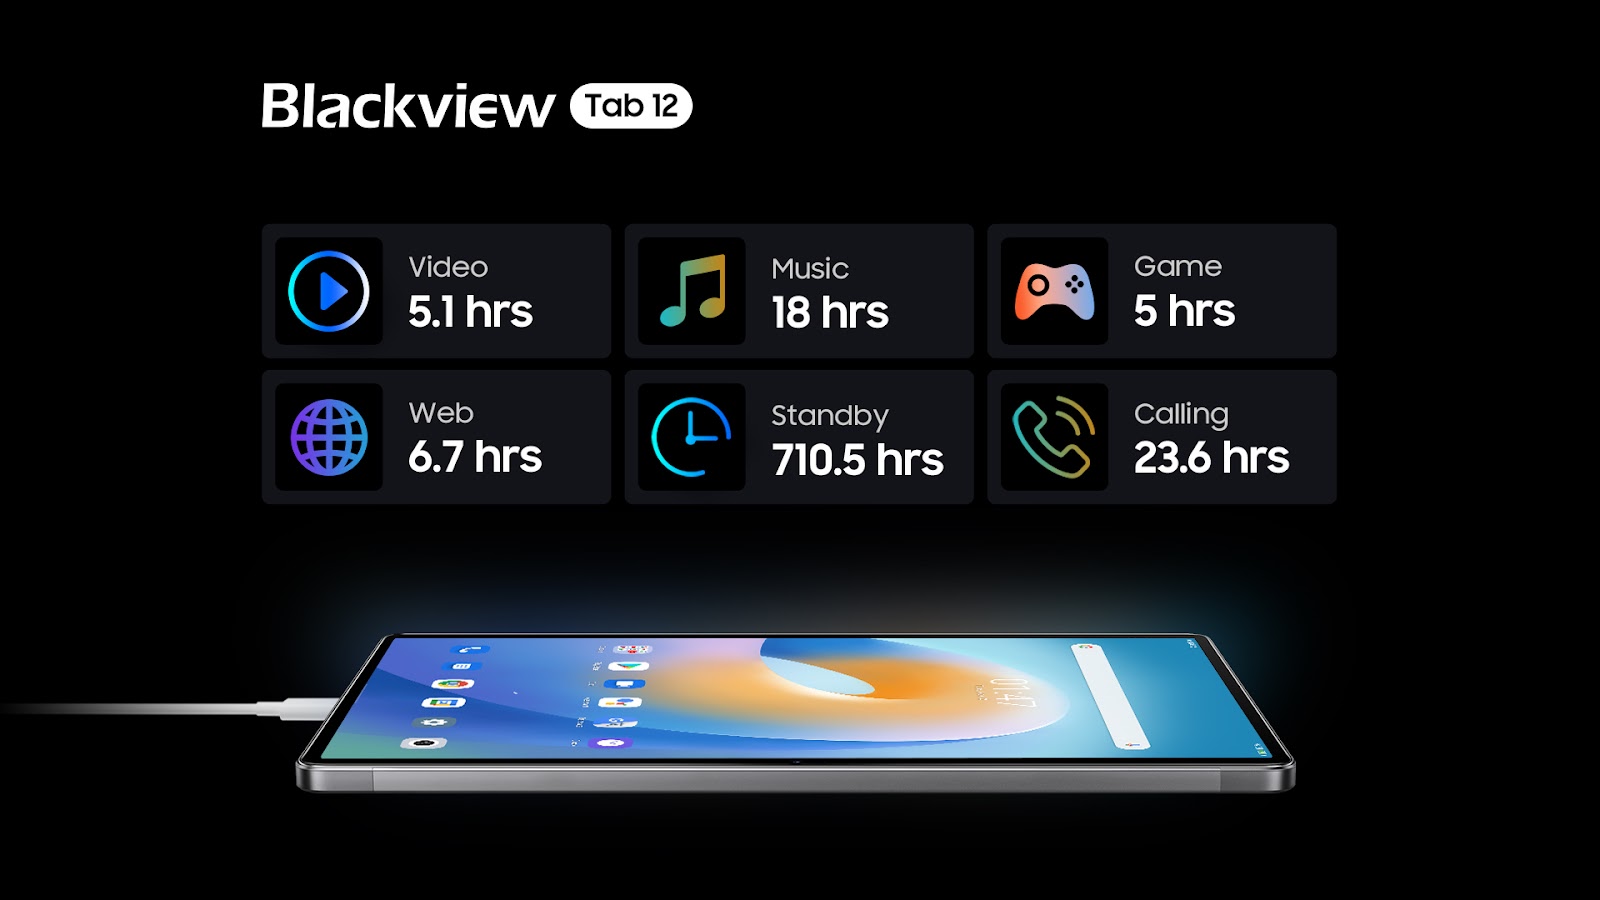 Voguishly designed Blackview Tab 12 with Doke OS_P 2.0 now on sale img 627e47b5410c9